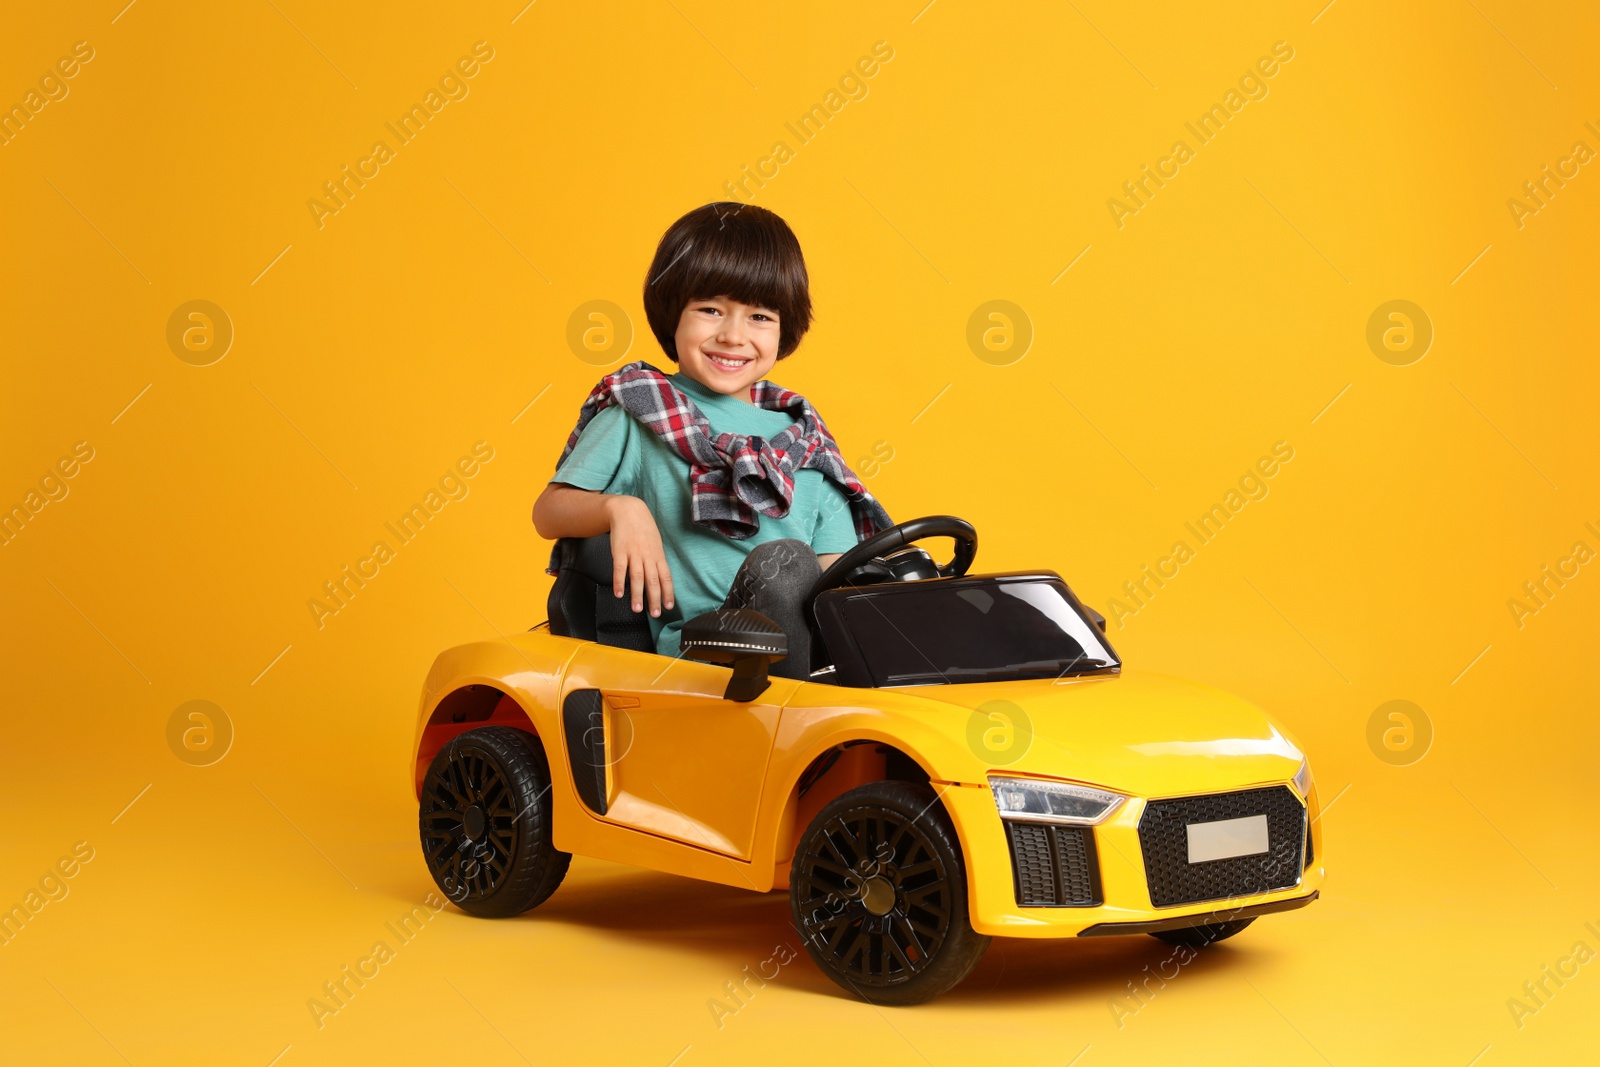 Photo of Little child driving toy car on yellow background